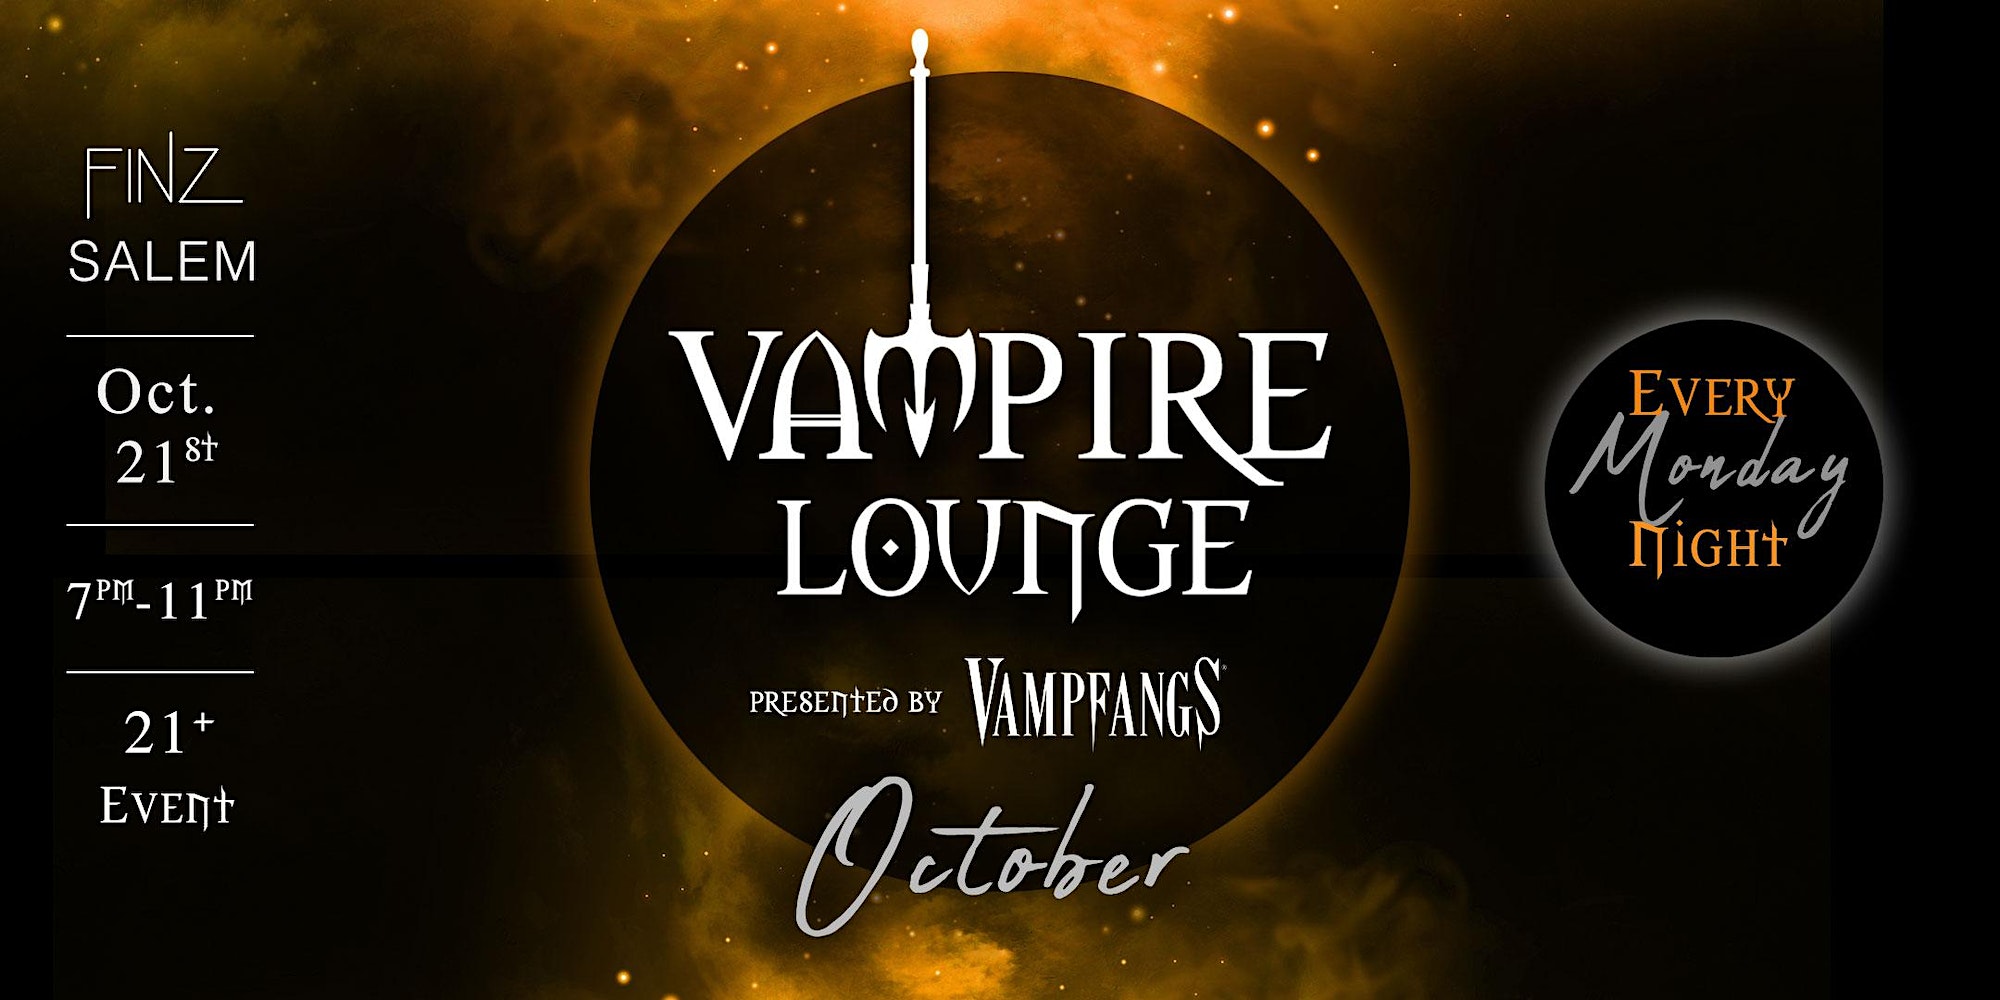 October at the Vampire Lounge - Buzzing Excitement for Spooky Fun.